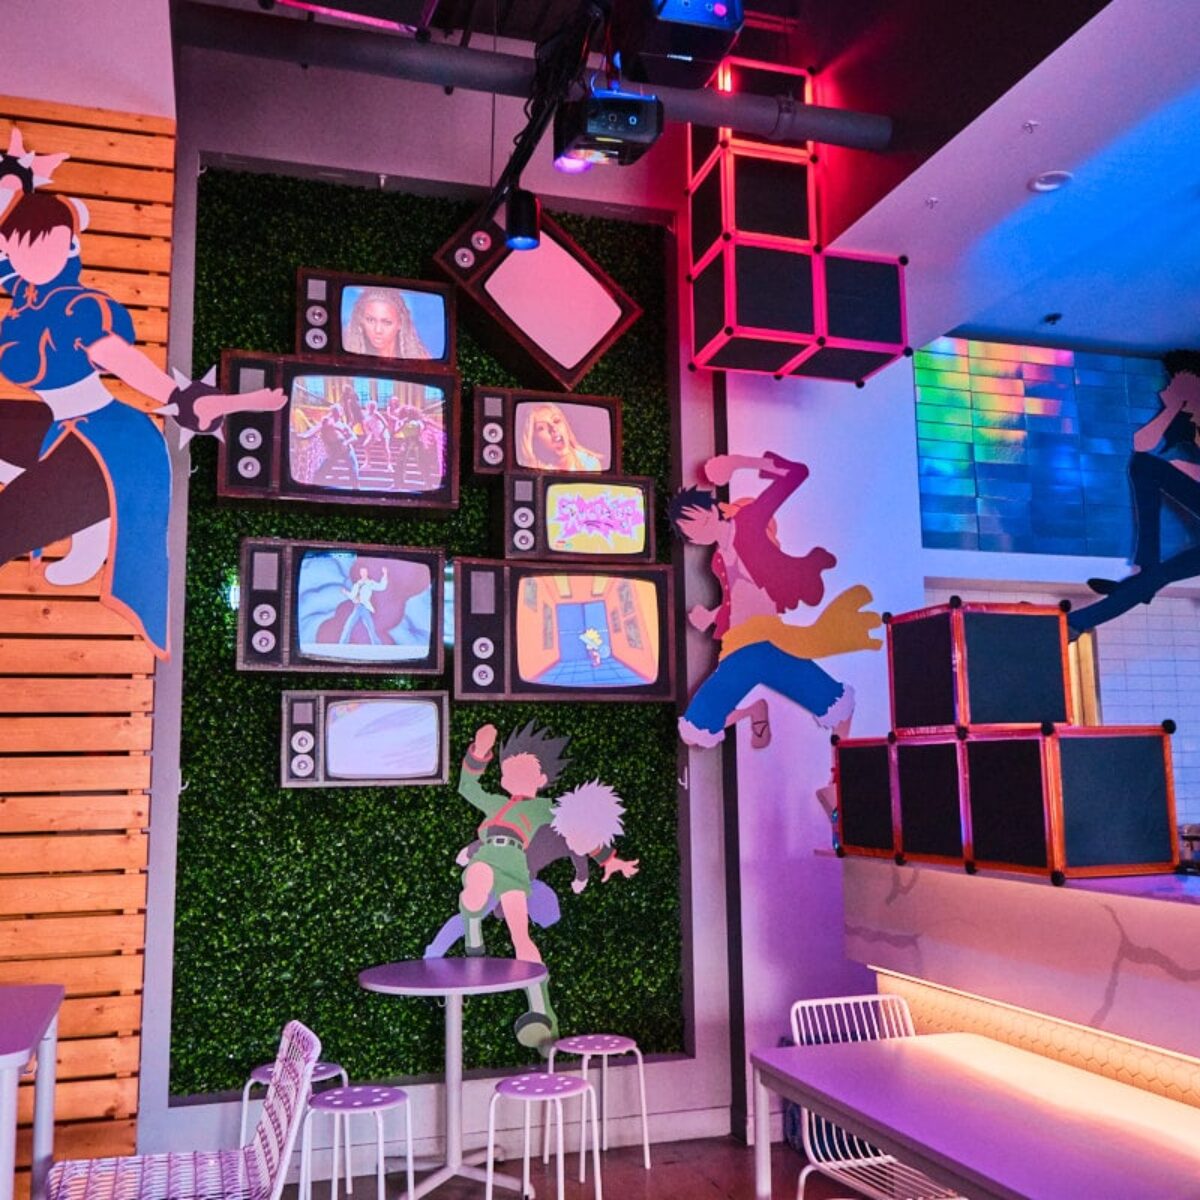 LEVEL UP ’90s Anime Arcade Themed Cafe at Popfancy